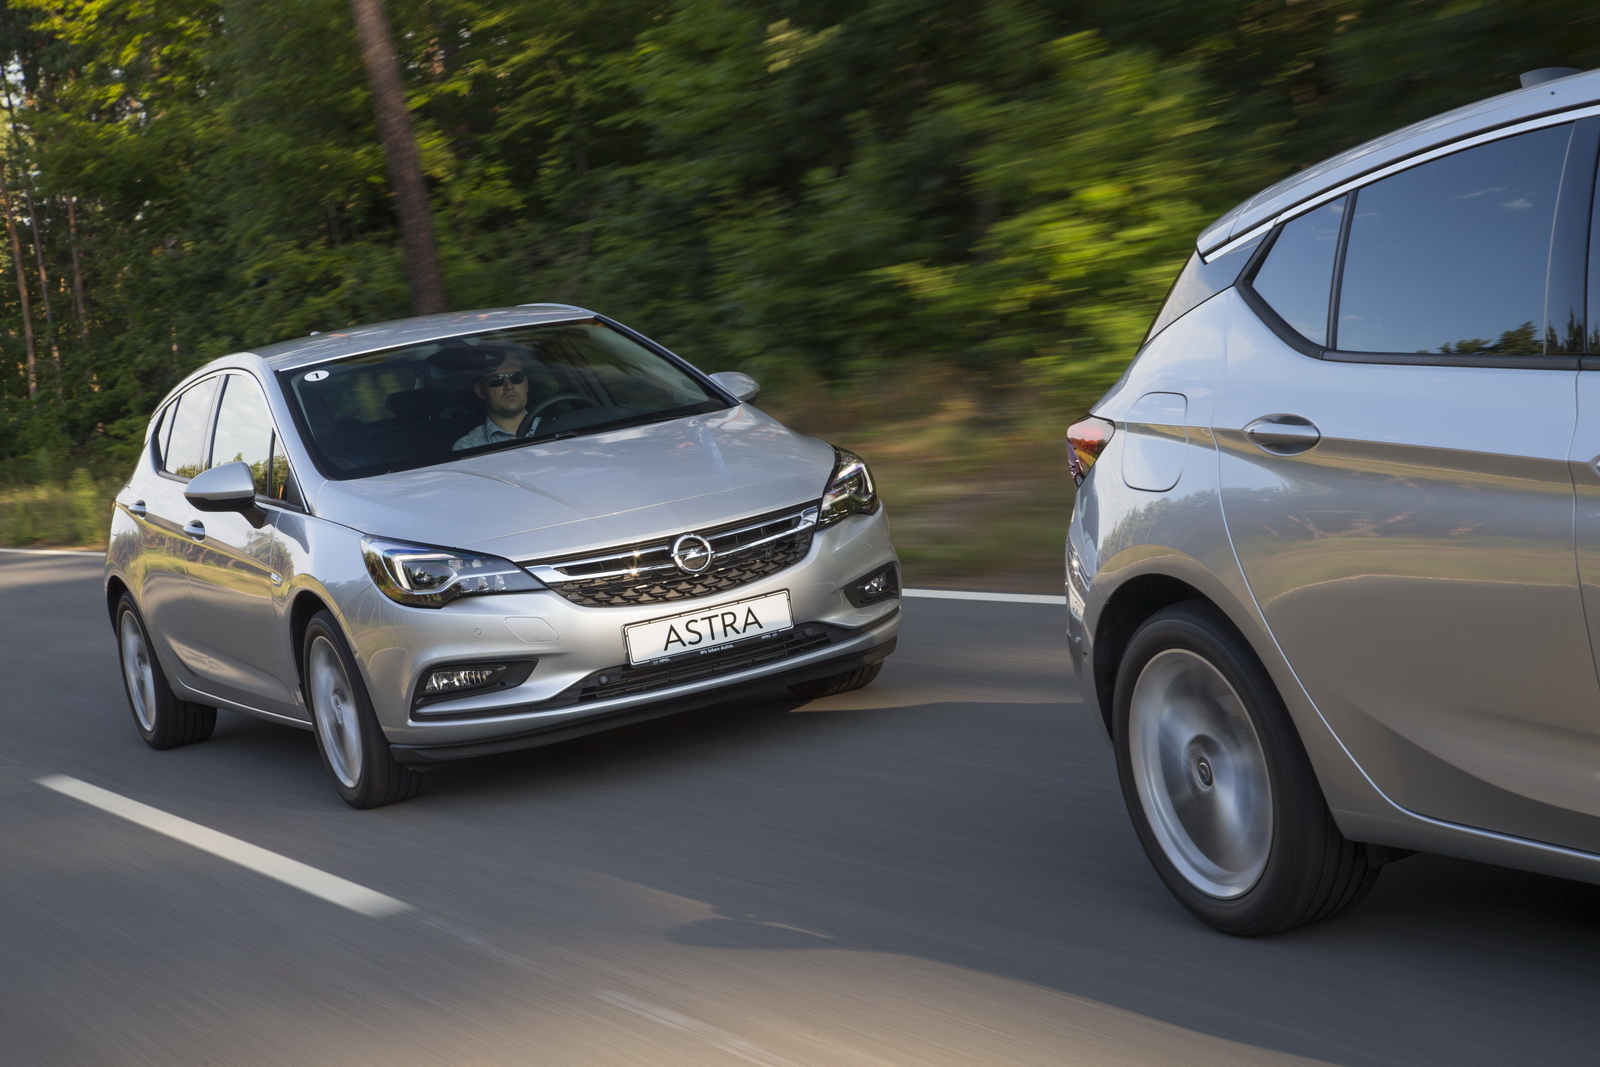 New Opel Astra Comes Packed With Driver Assistance Systems